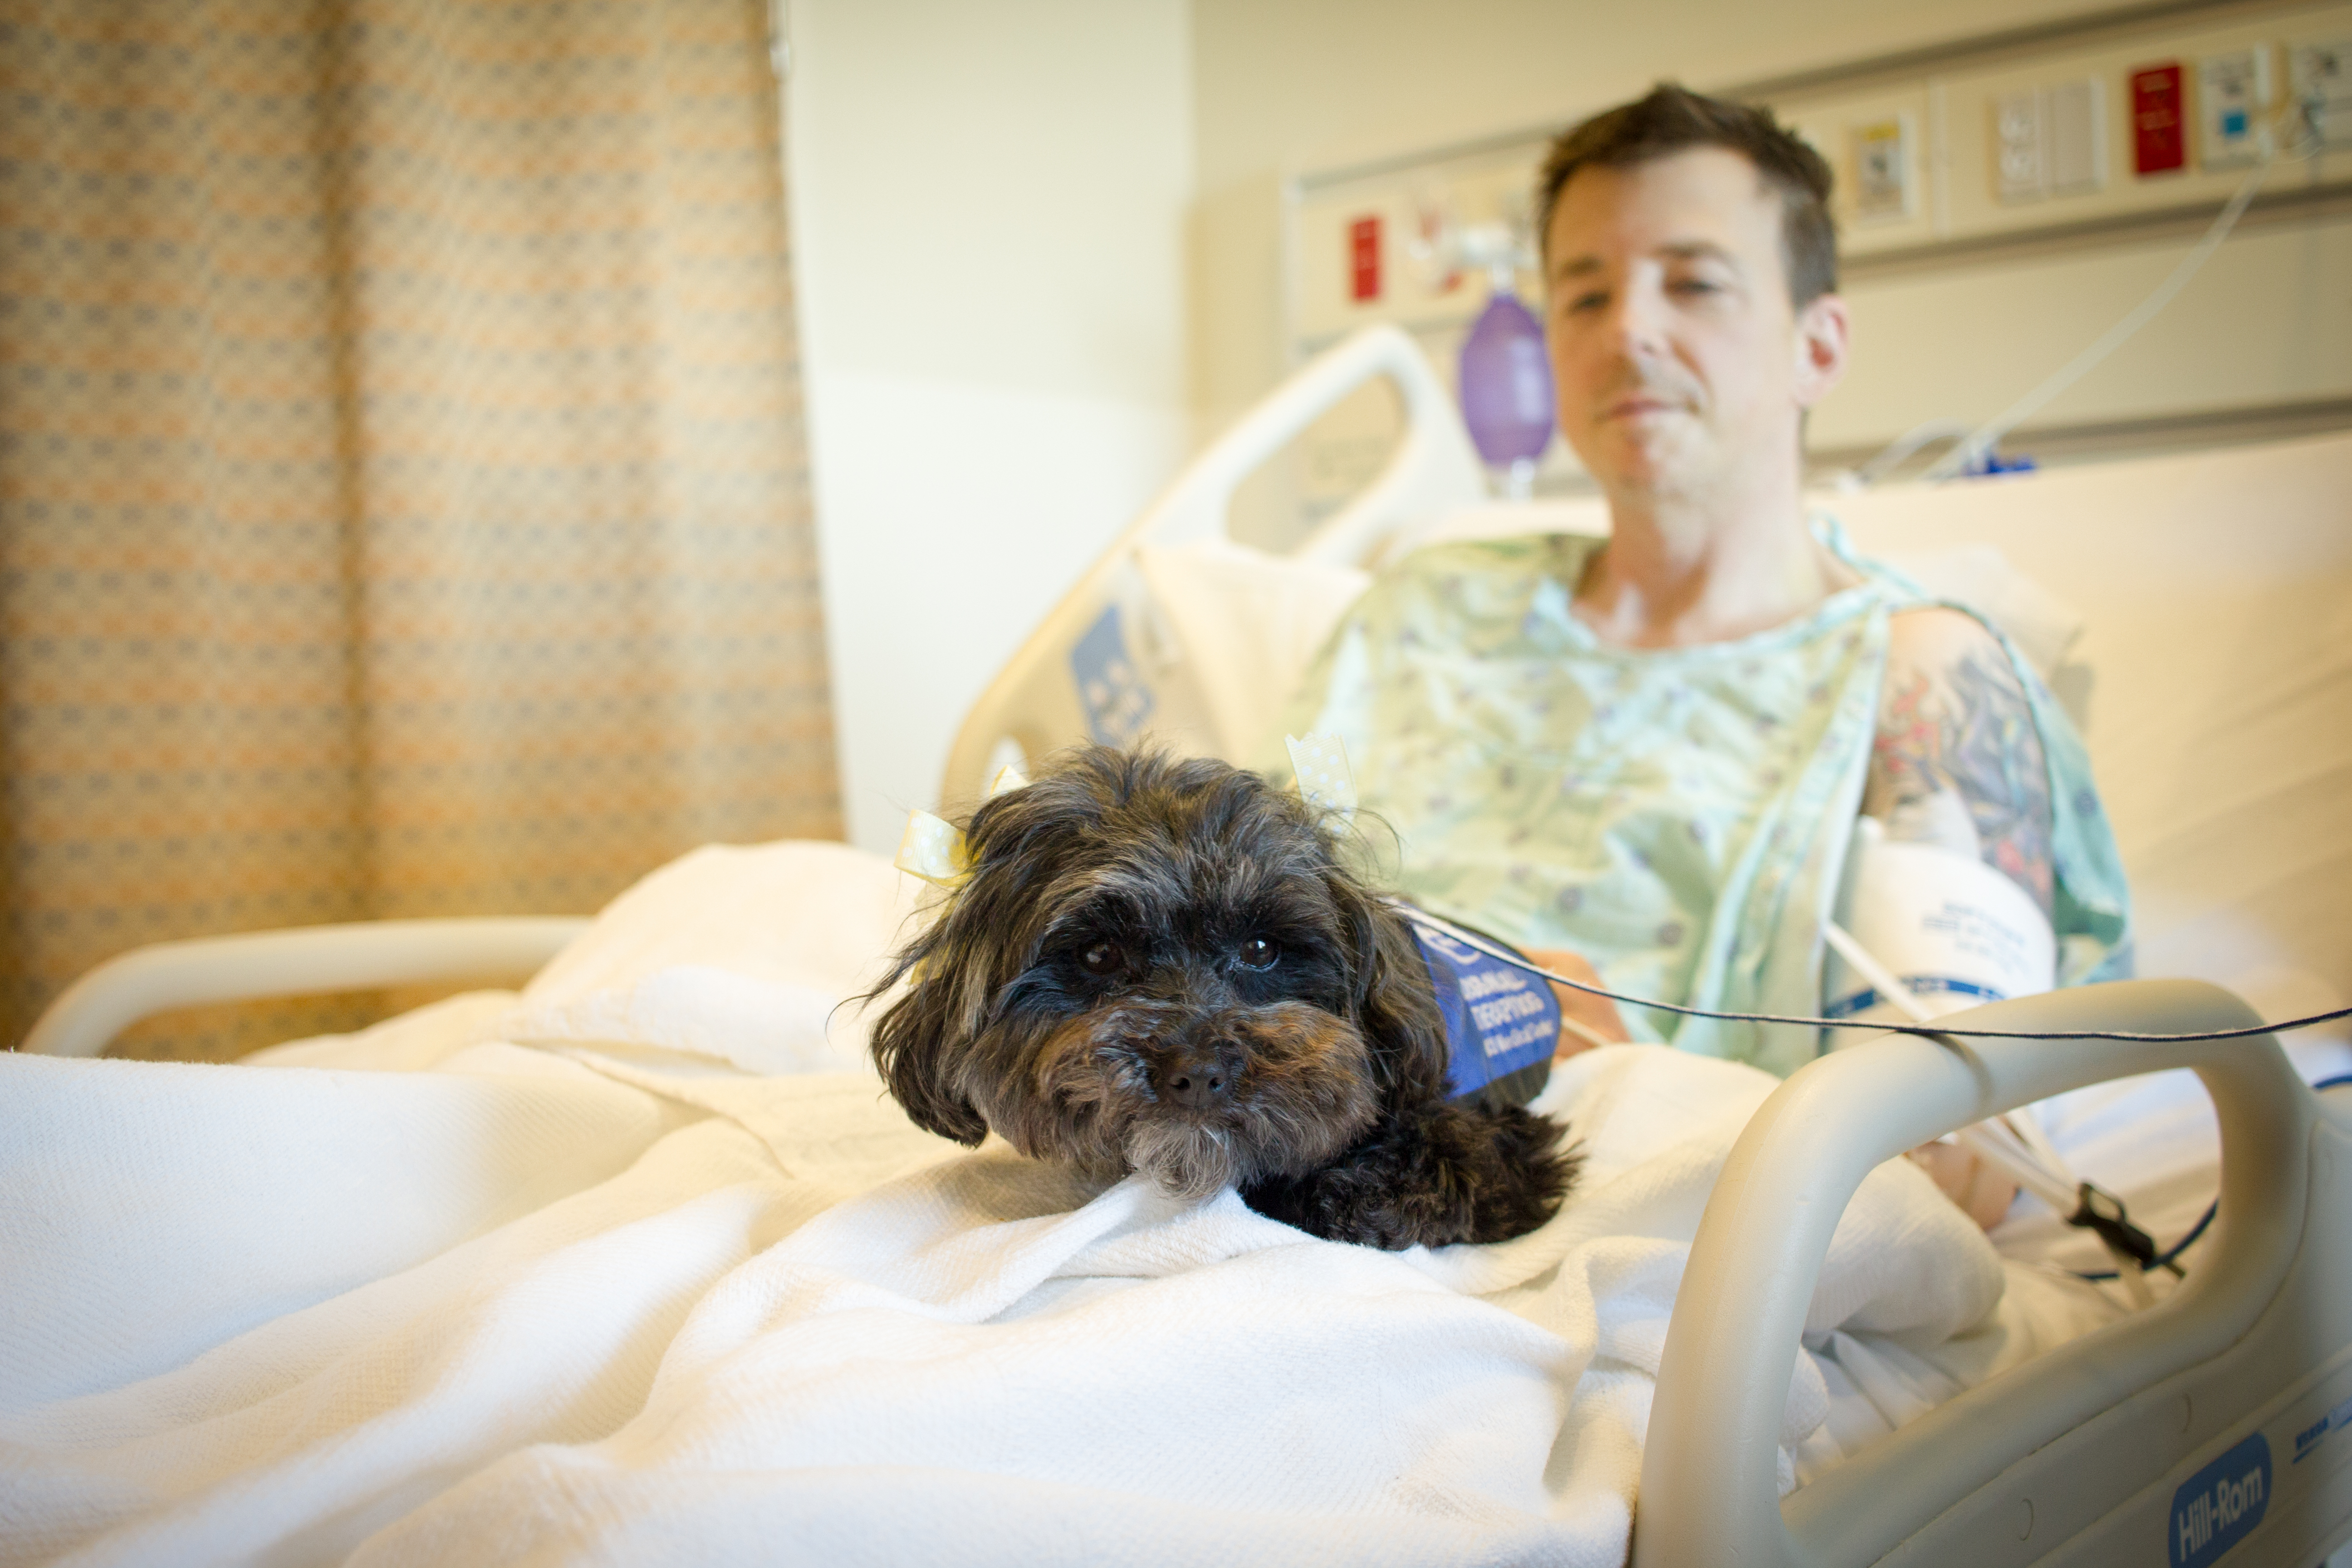 Dogs On Call therapy dog Phoebe, a black maltipoo, sits on the knees of a patient in their bed. Phoebe is asleep.